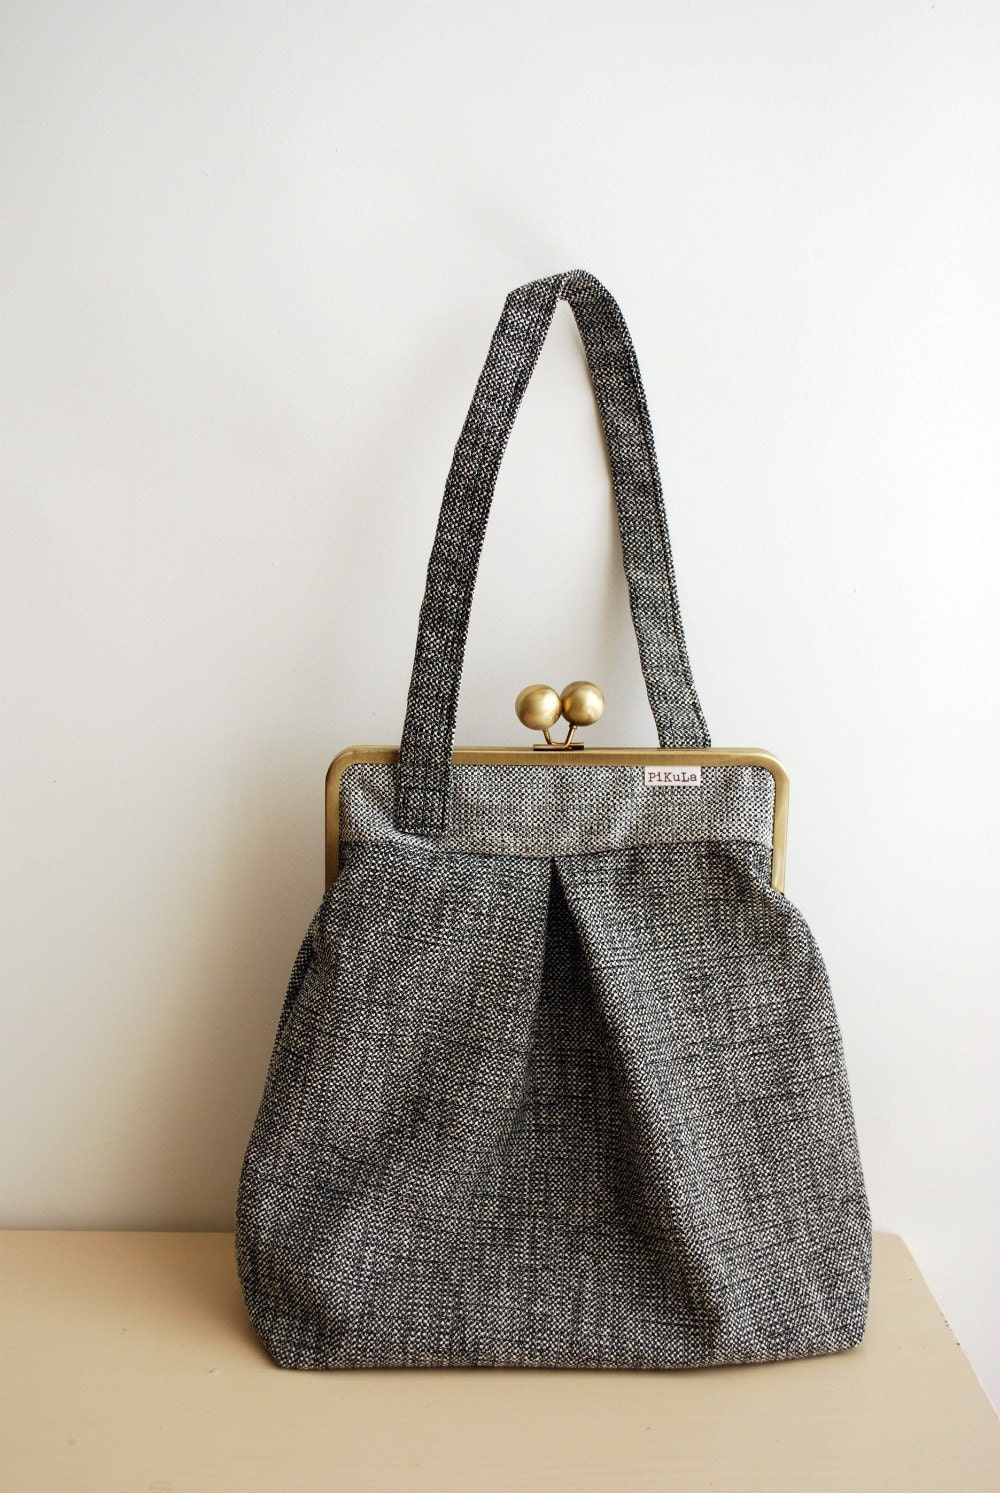 LARGE BAG grey and white